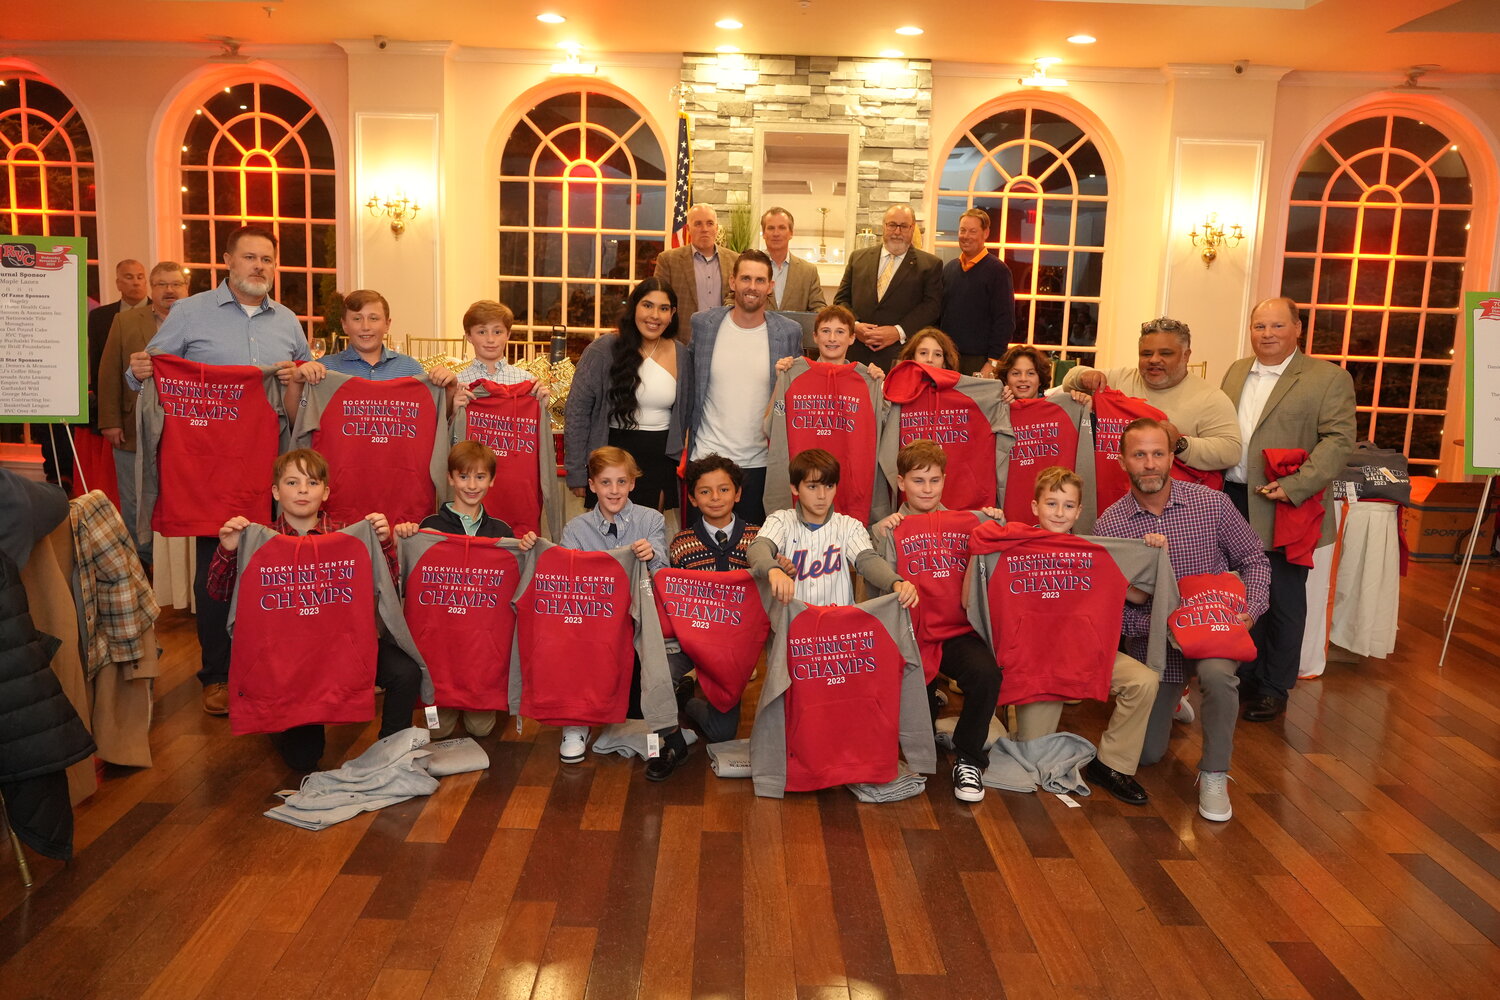 The D30 championship-winning 11-and-under team was also recognized during the annual awards dinner.